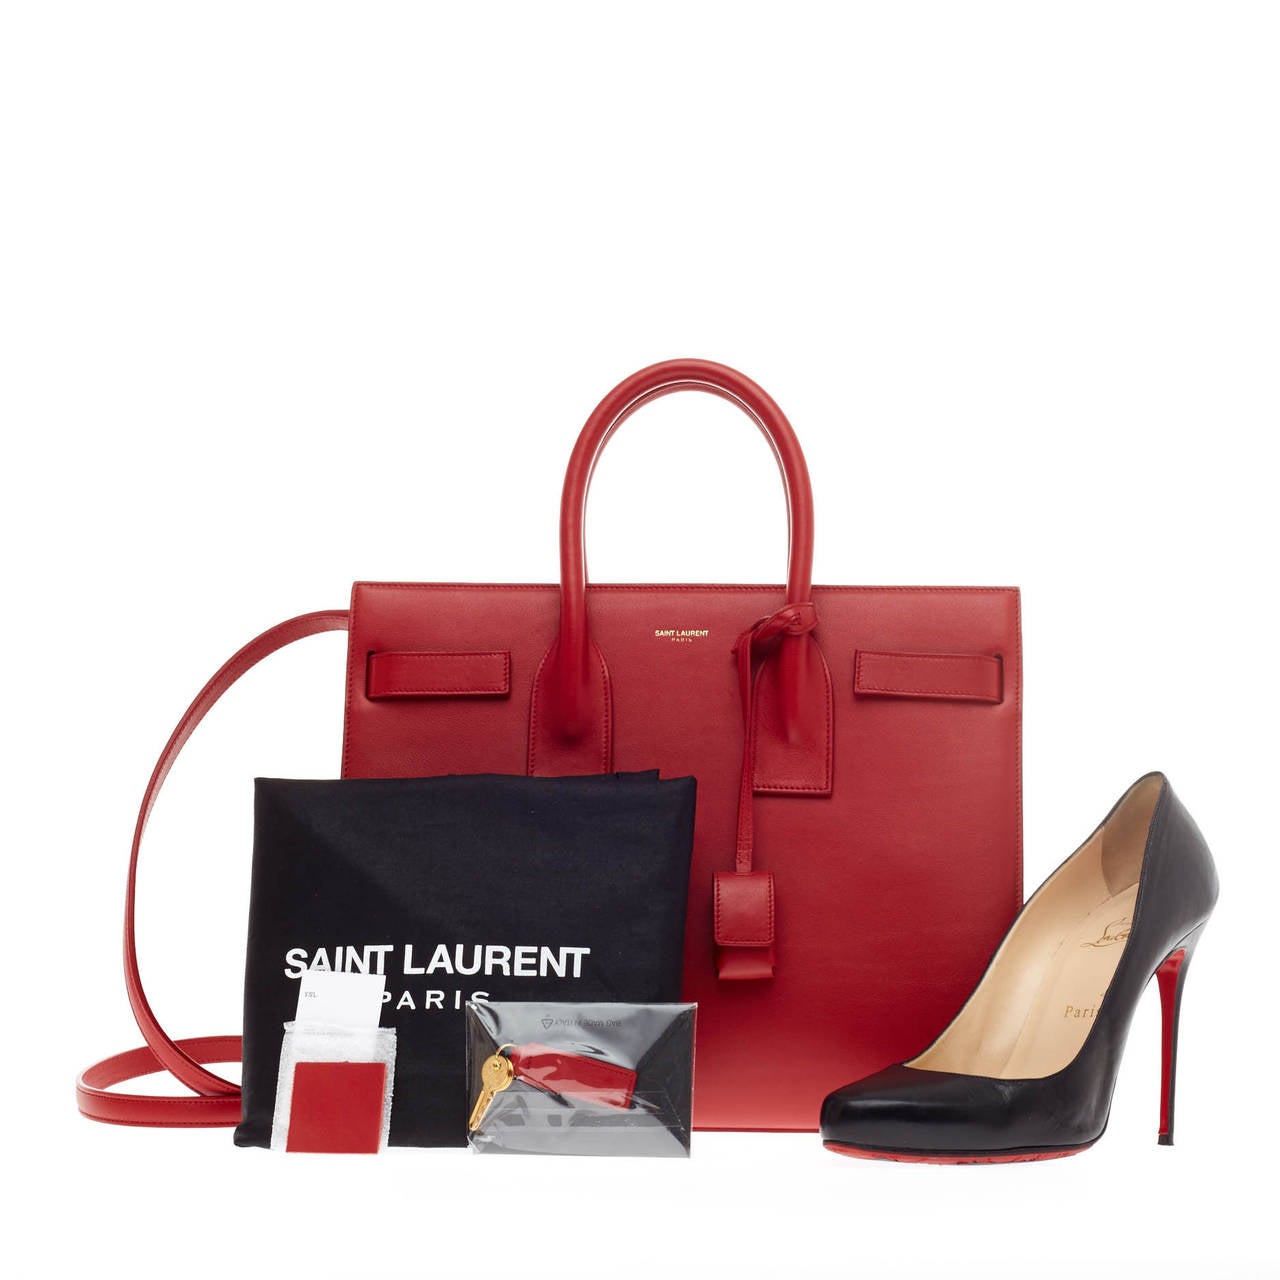 This authentic Saint Laurent Sac De Jour Tote Leather Small is a sleek yet elegant bag synonymous with the brand's classic aesthetic. This sought-after structured tote is crafted from vivid red vermillion leather, a gold Saint Laurent embossed